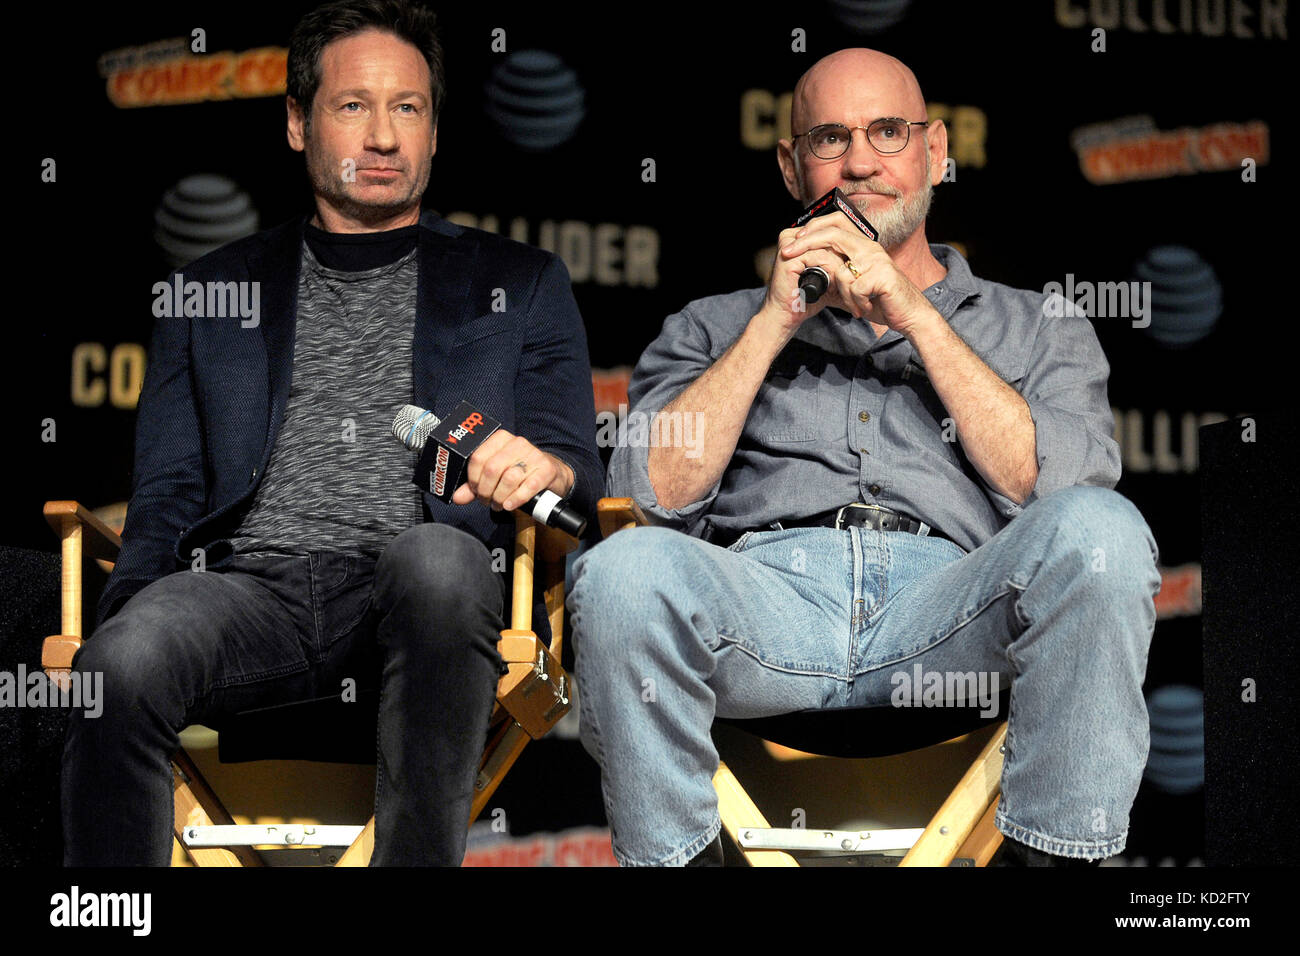 New York, USA. 8th Oct, 2017. David Duchovny and Mitch Pileggi speak at The X-Files panel during the New York Comic Con 2017 at Javits Center on October 8, 2017 in New York City. Credit: Geisler-Fotopress/Alamy Live News Stock Photo